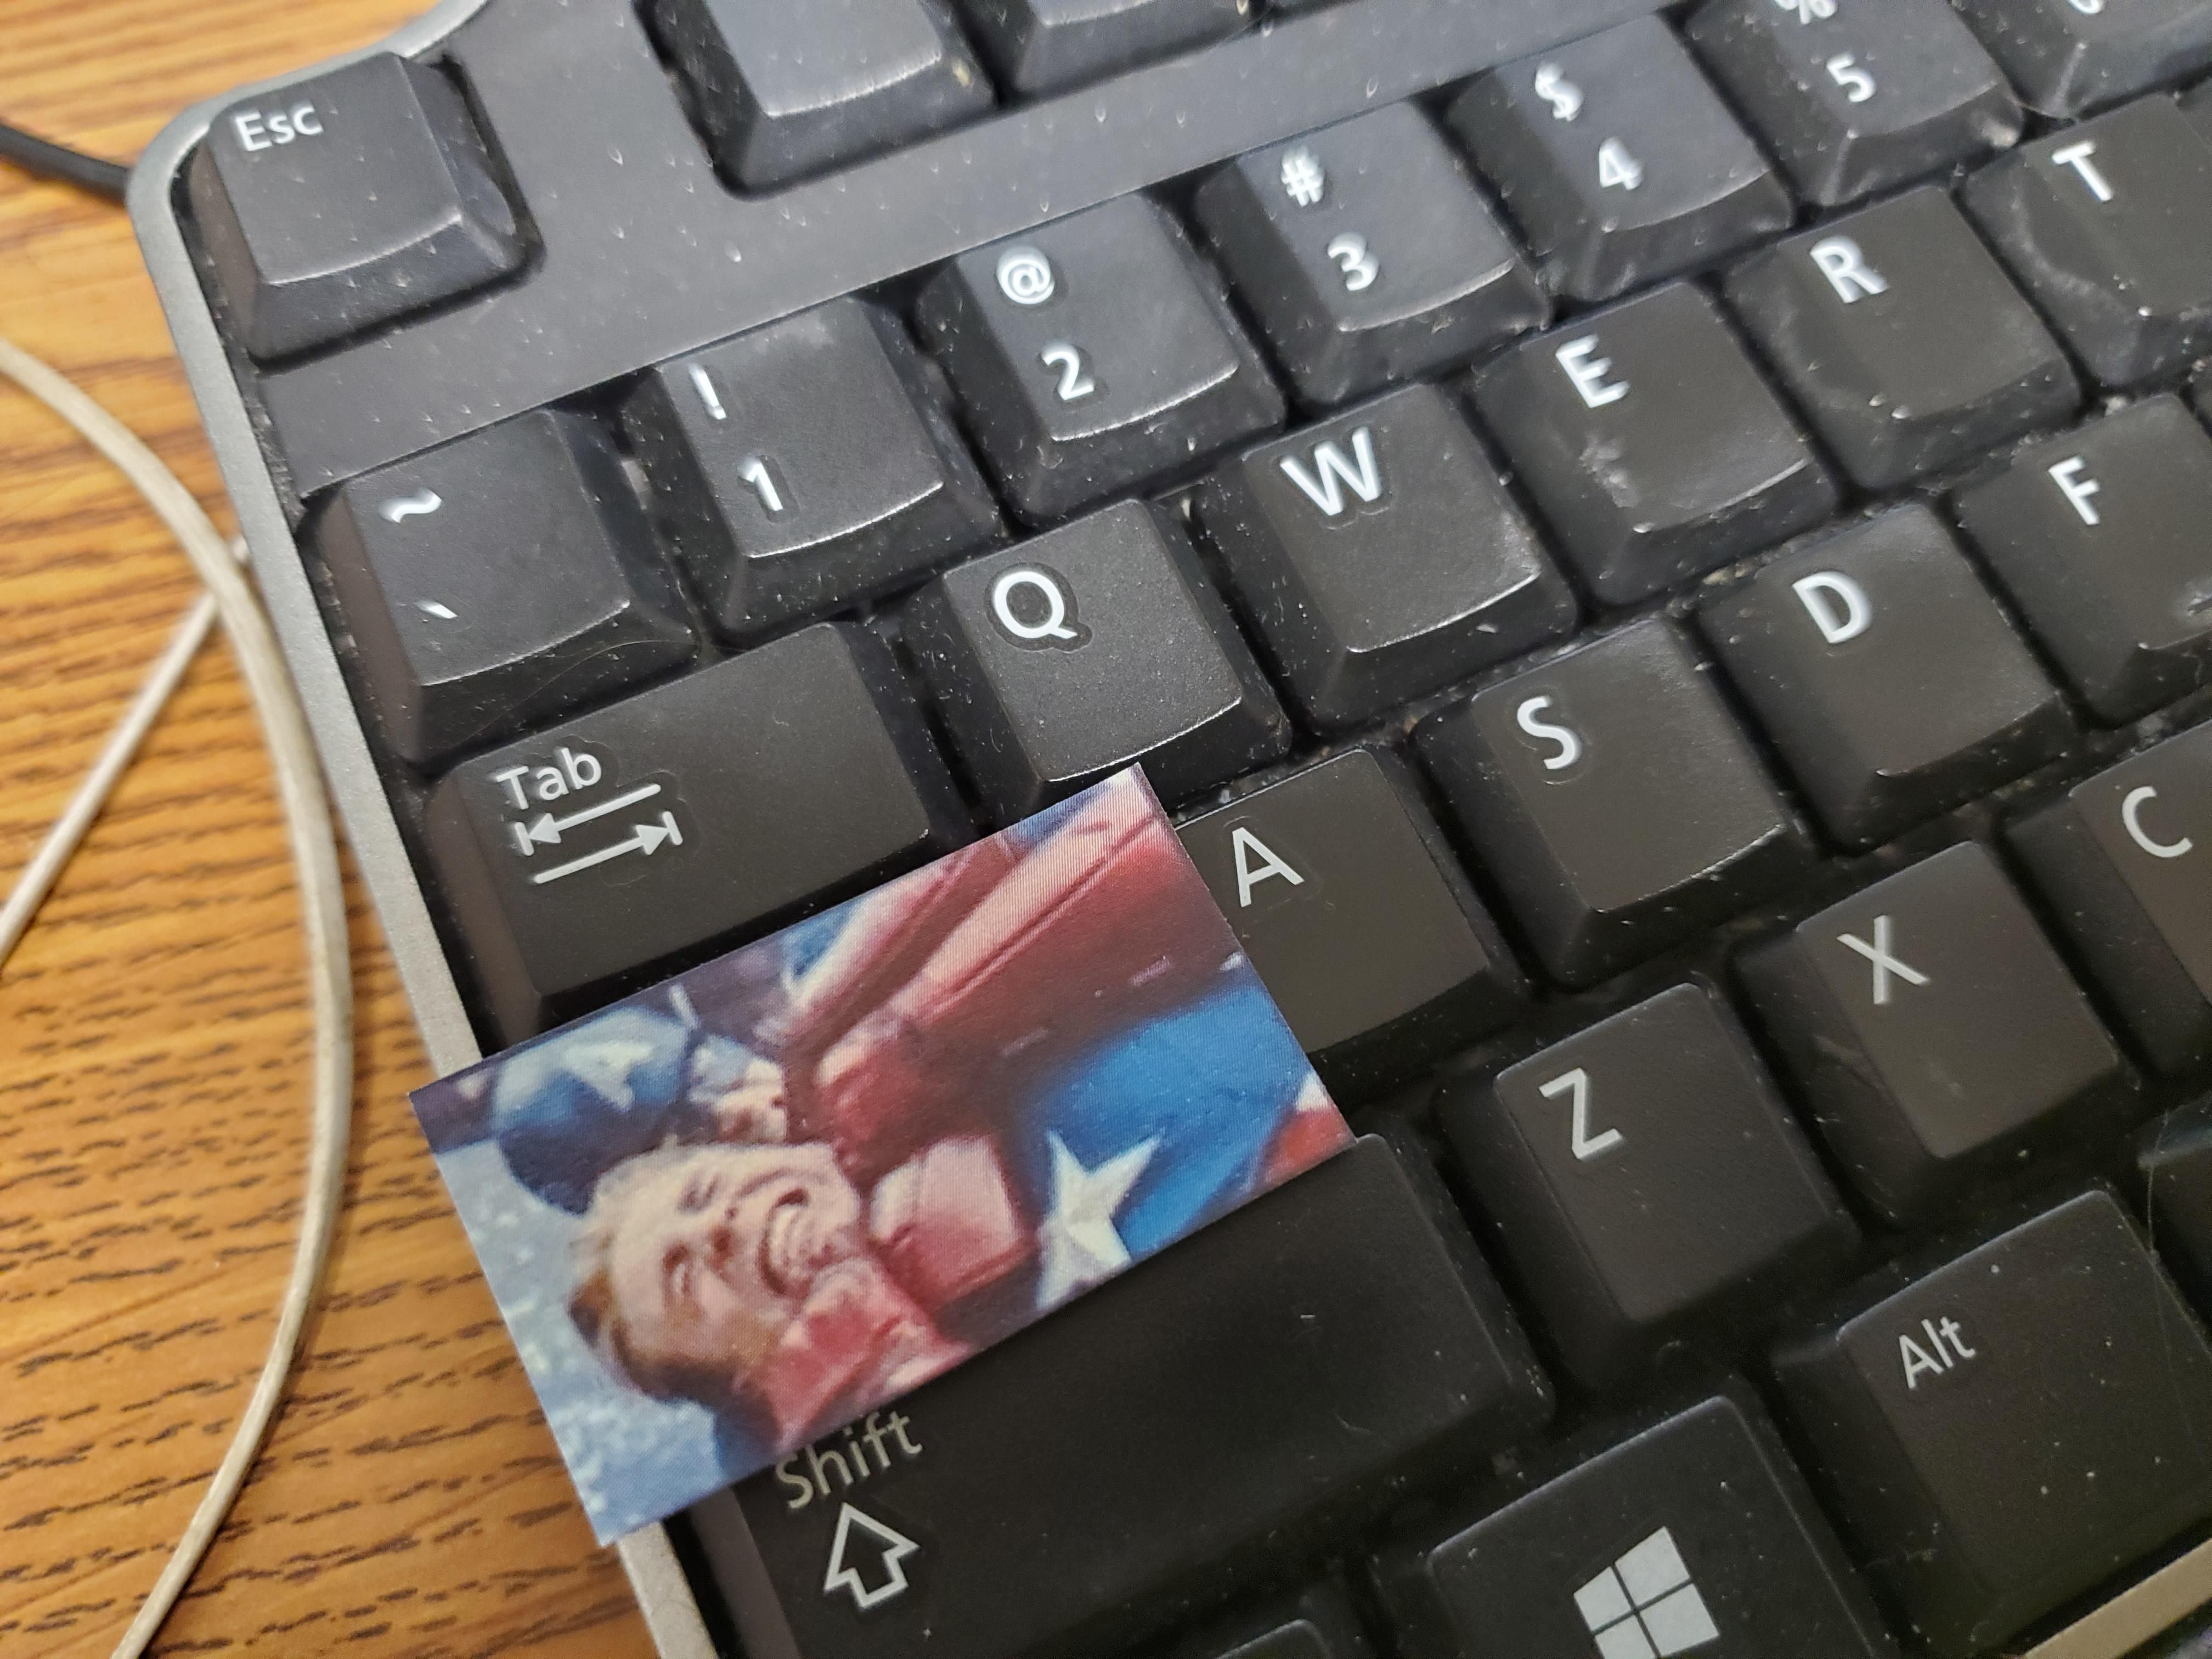 Found on my keyboard this morning.